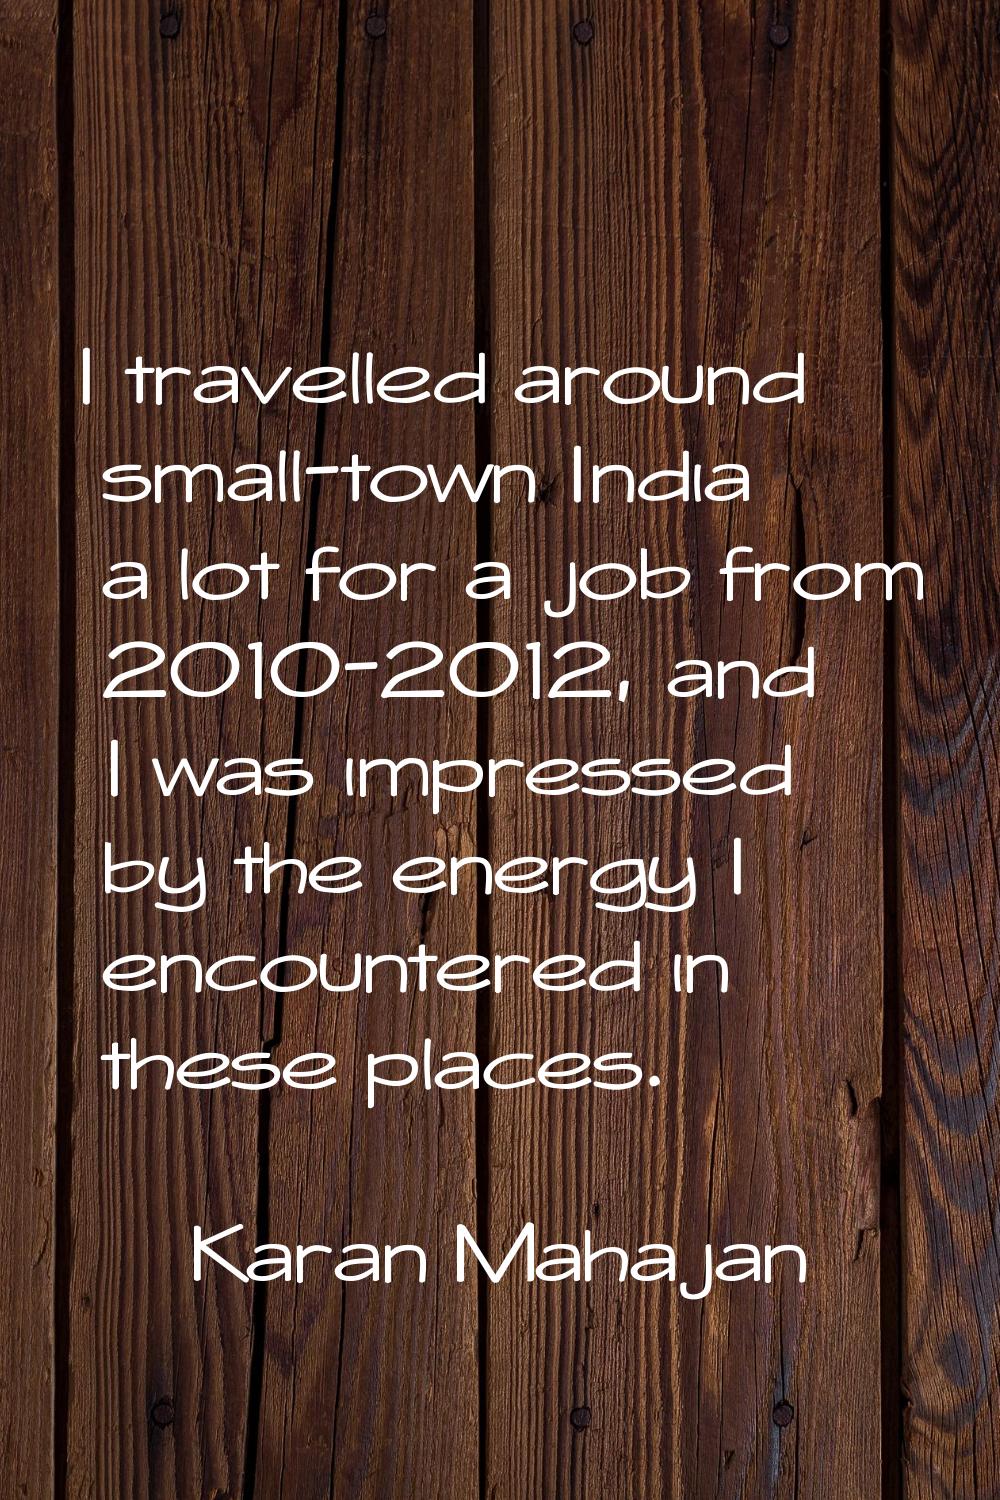 I travelled around small-town India a lot for a job from 2010-2012, and I was impressed by the ener